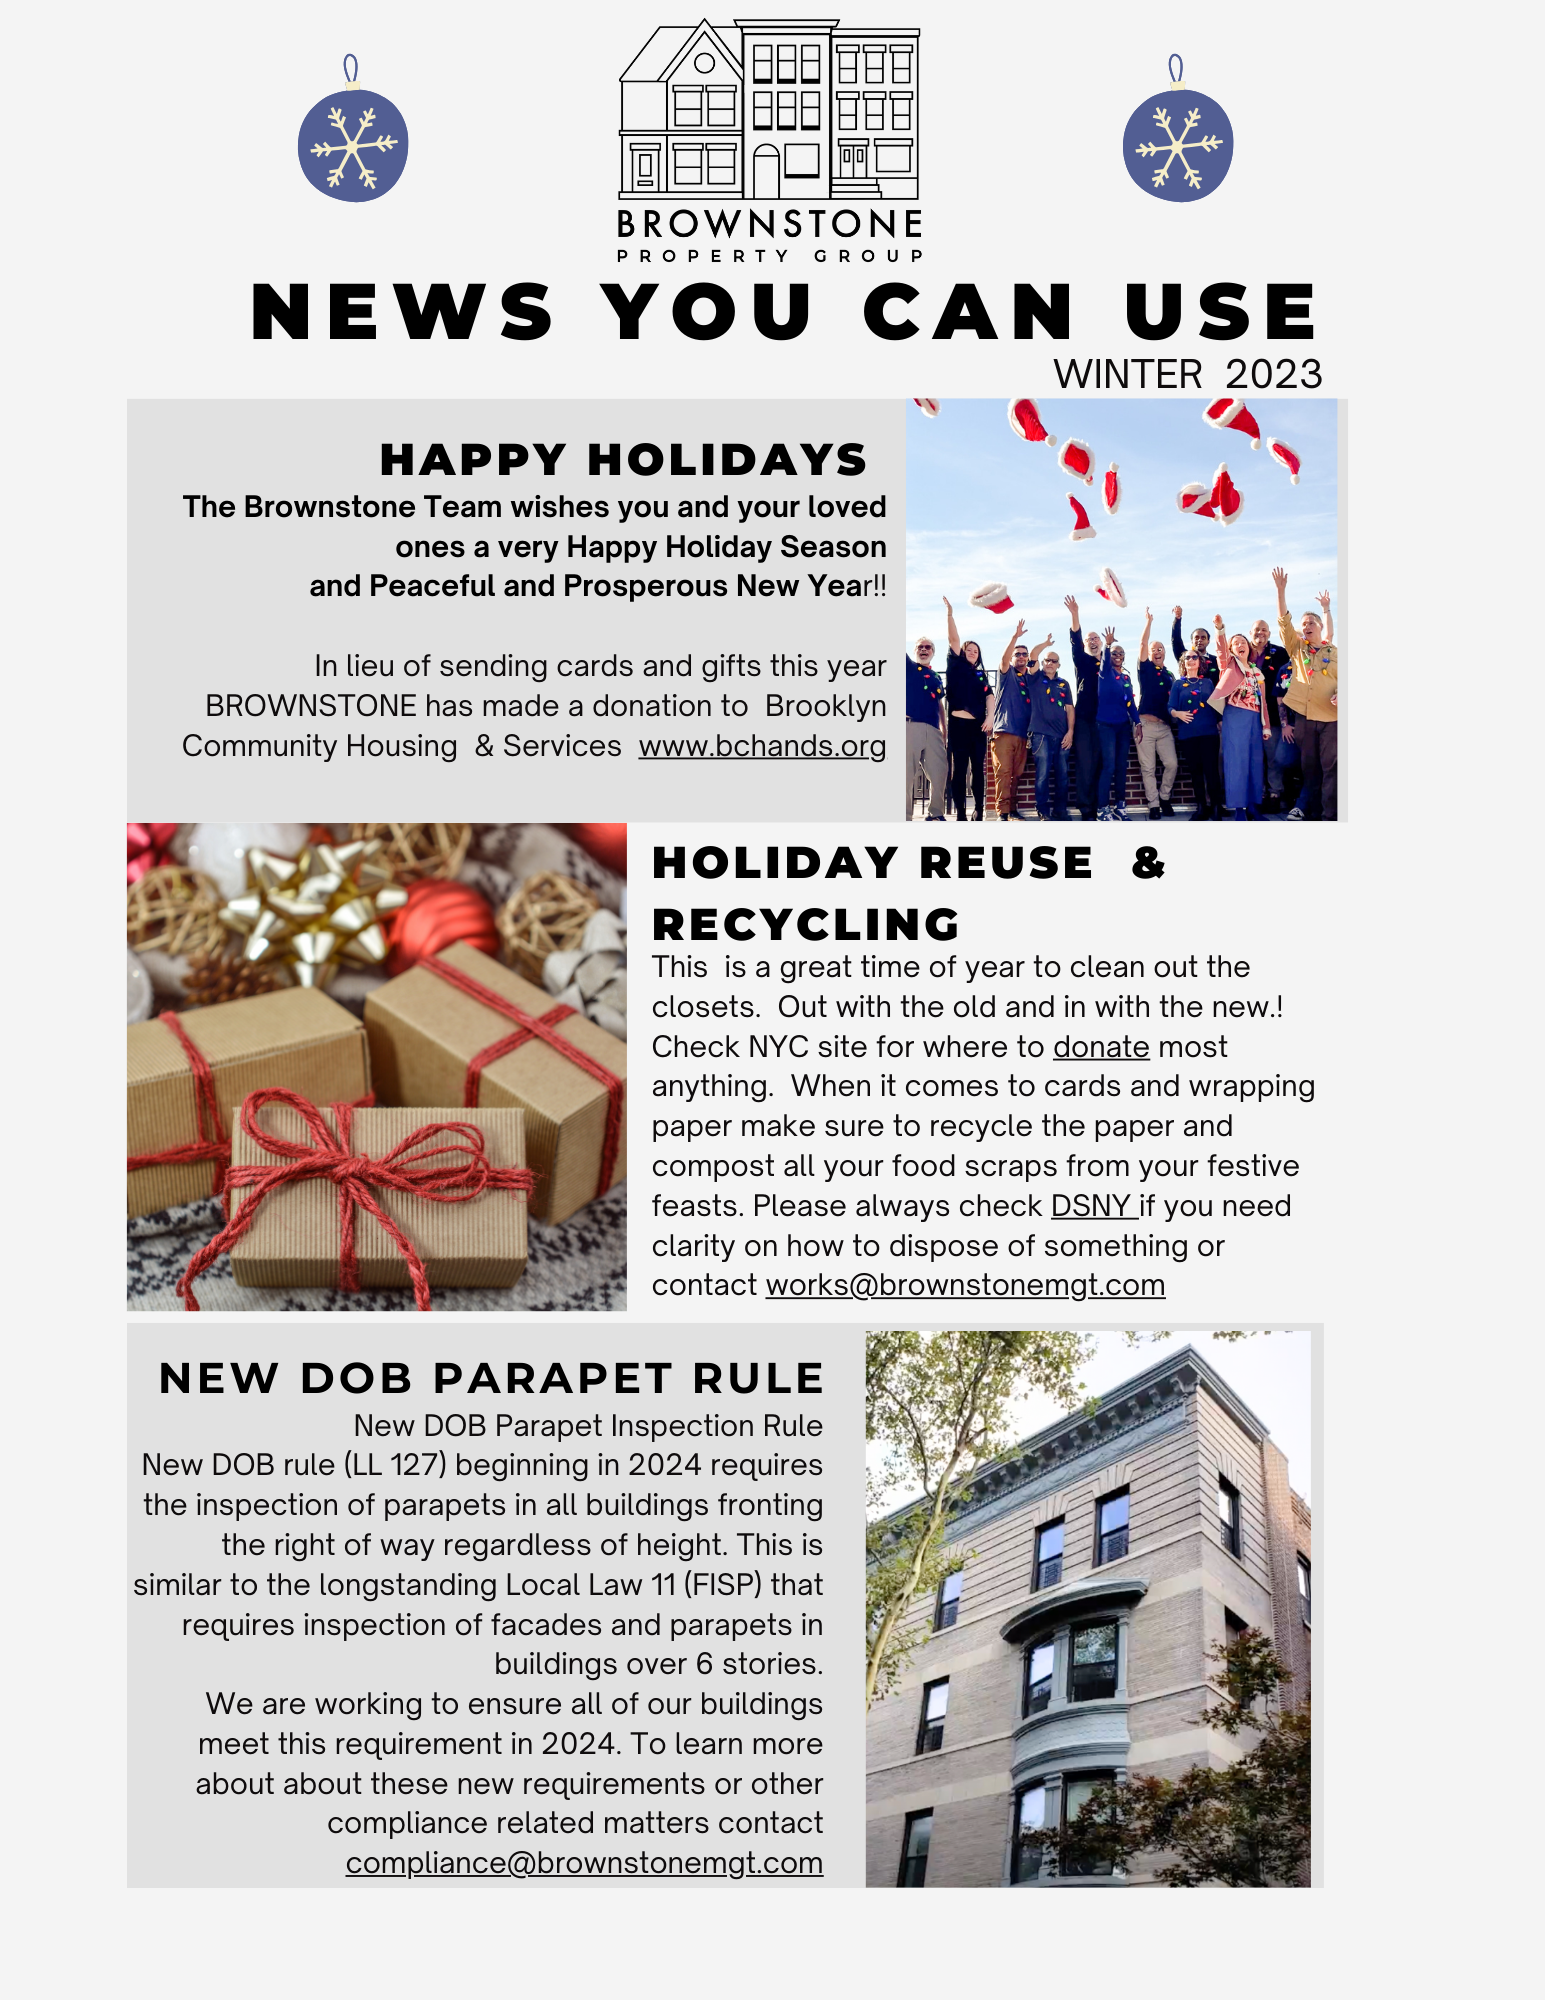 This  is a great time of year to clean out the closets.  Out with the old and in with the new.! Check NYC site for where to donate most anything.  When it comes to cards and wrapping paper make sure to recycle the paper and compost all your food scraps from your festive feasts. Please always check DSNY if you need clarity on how to dispose of something or contact works@brownstonemgt.com
New DOB Parapet Inspection Rule
New DOB rule (LL 127) beginning in 2024 requires the inspection of parapets in all buildings fronting the right of way regardless of height. This is similar to the longstanding Local Law 11 (FISP) that requires inspection of facades and parapets in buildings over 6 stories. 
We are working to ensure all of our buildings meet this requirement in 2024. To learn more about about these new requirements or other compliance related matters contact compliance@brownstonemgt.com 
